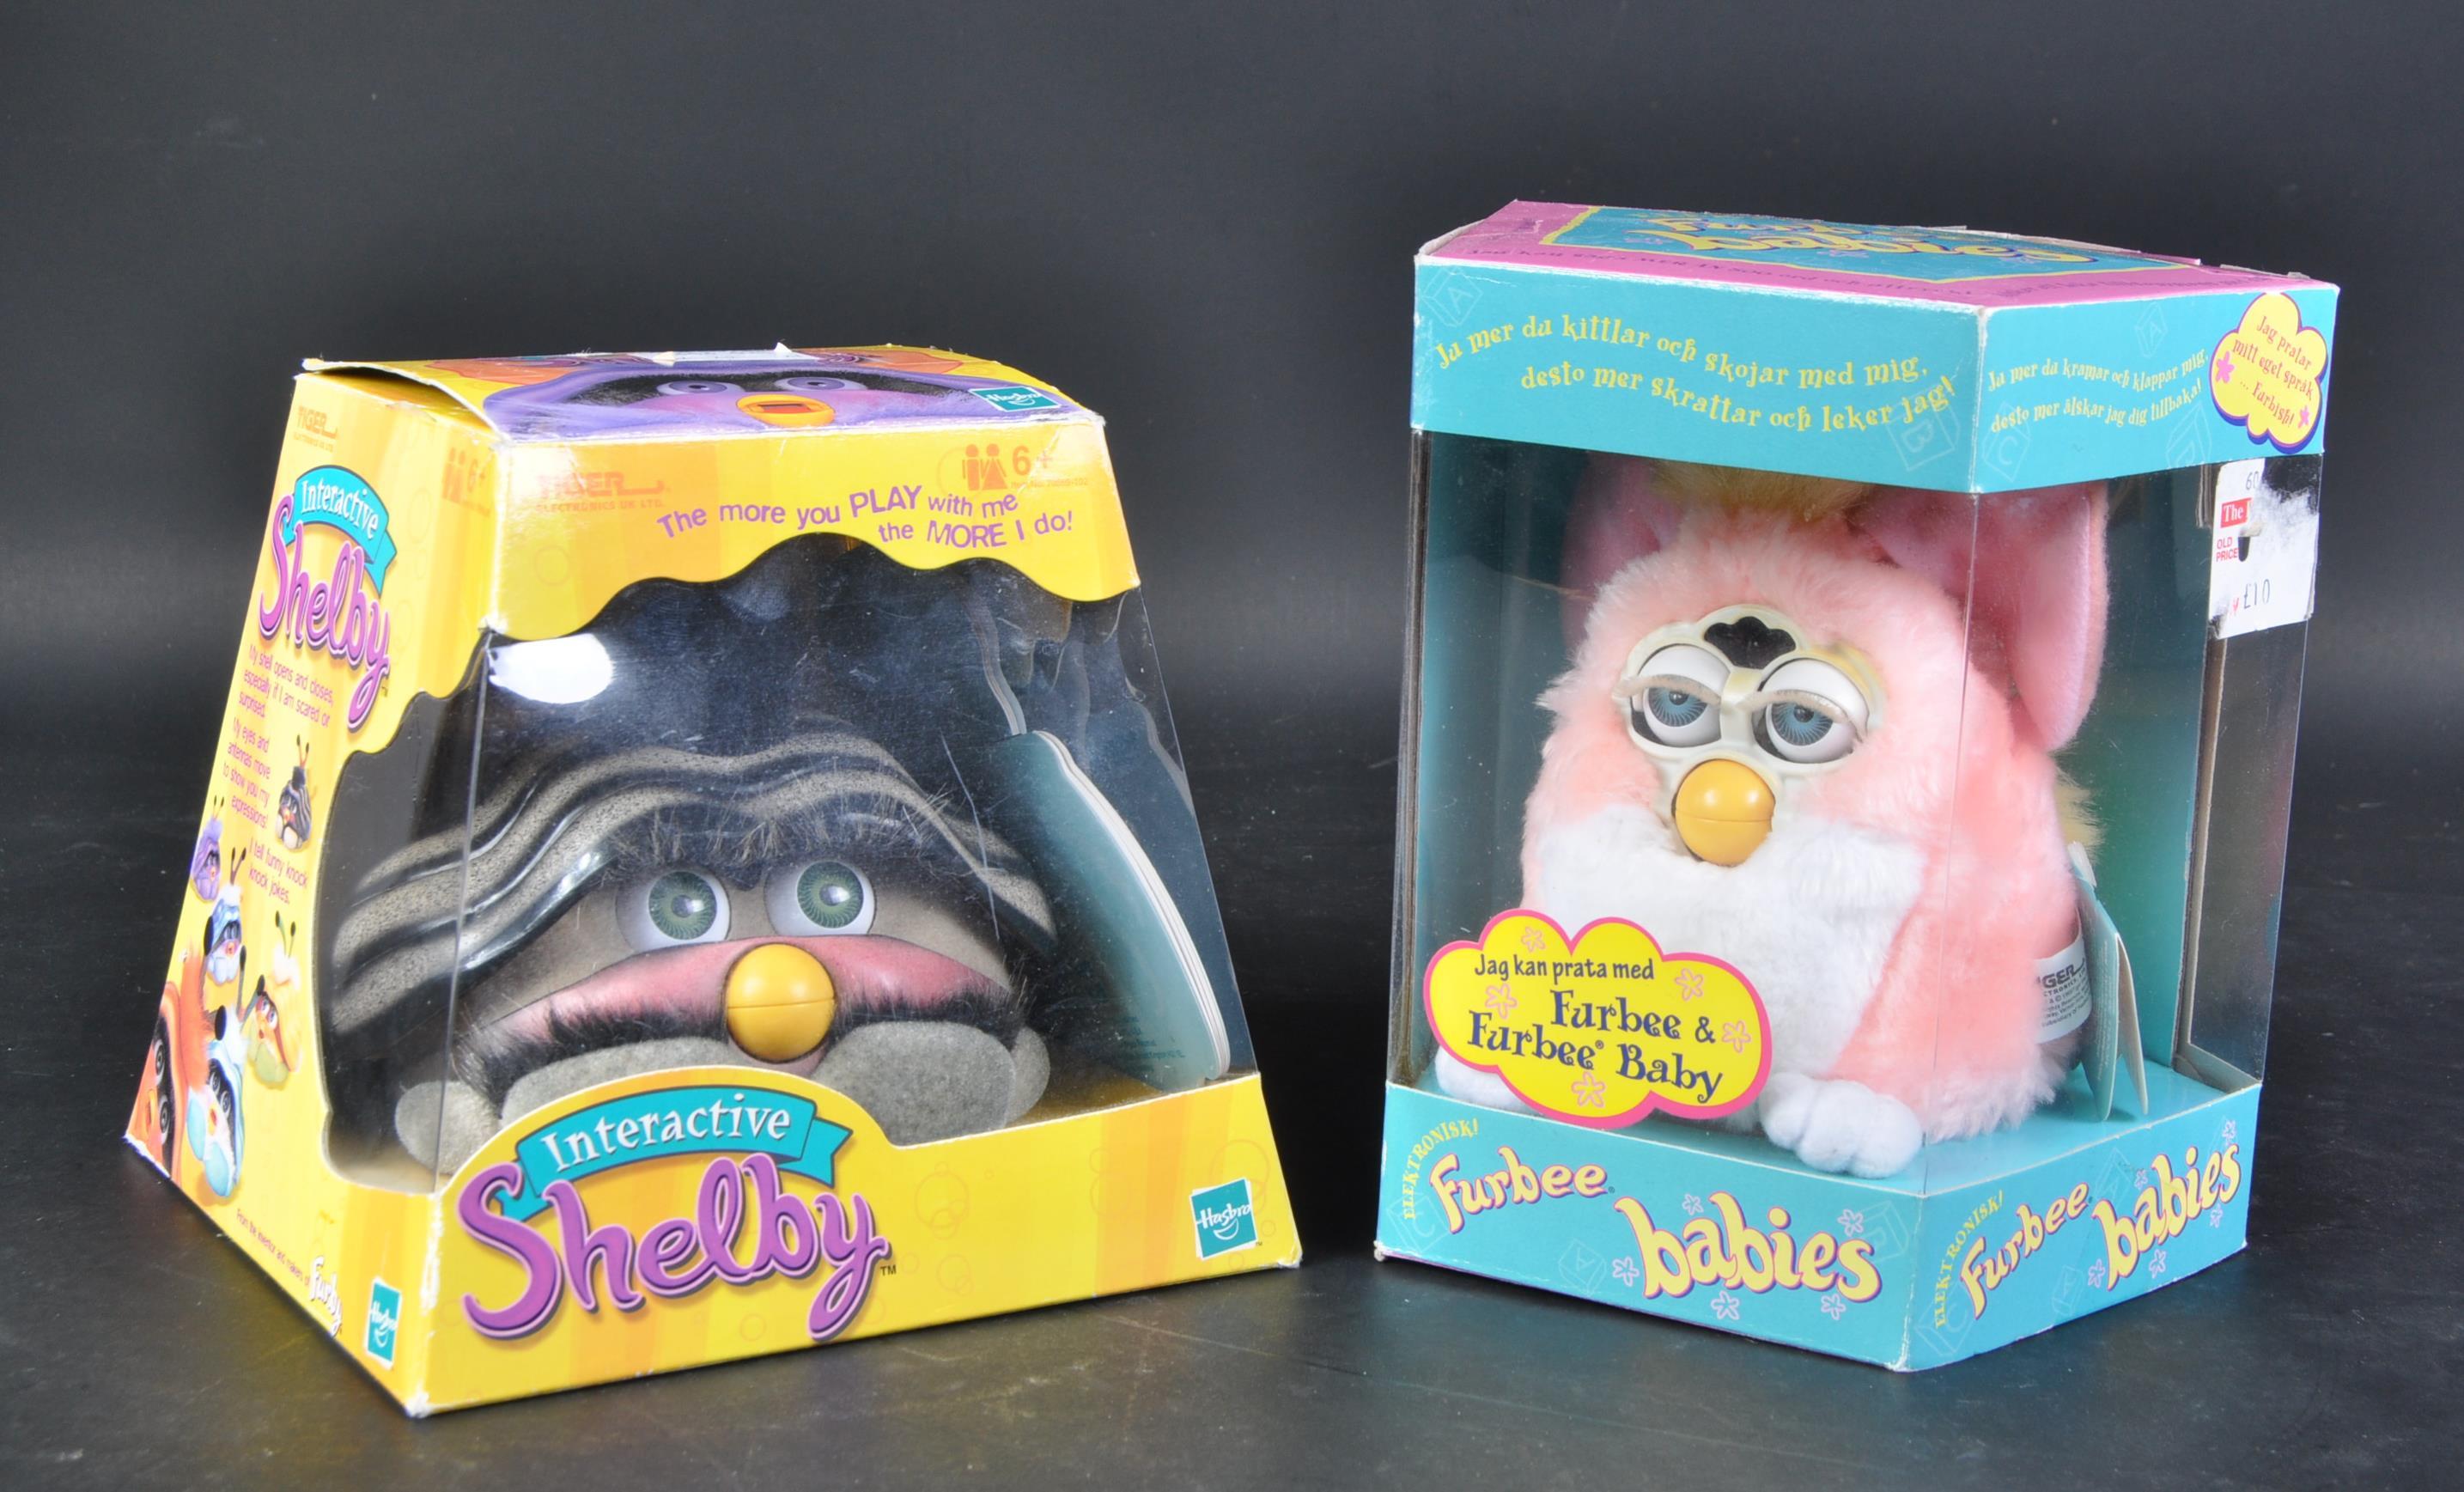 BOXED HASBRO MADE TIGER ELECTRONICS INTERACTIVE SHELBY CLAM & BOXED FURBY BABY